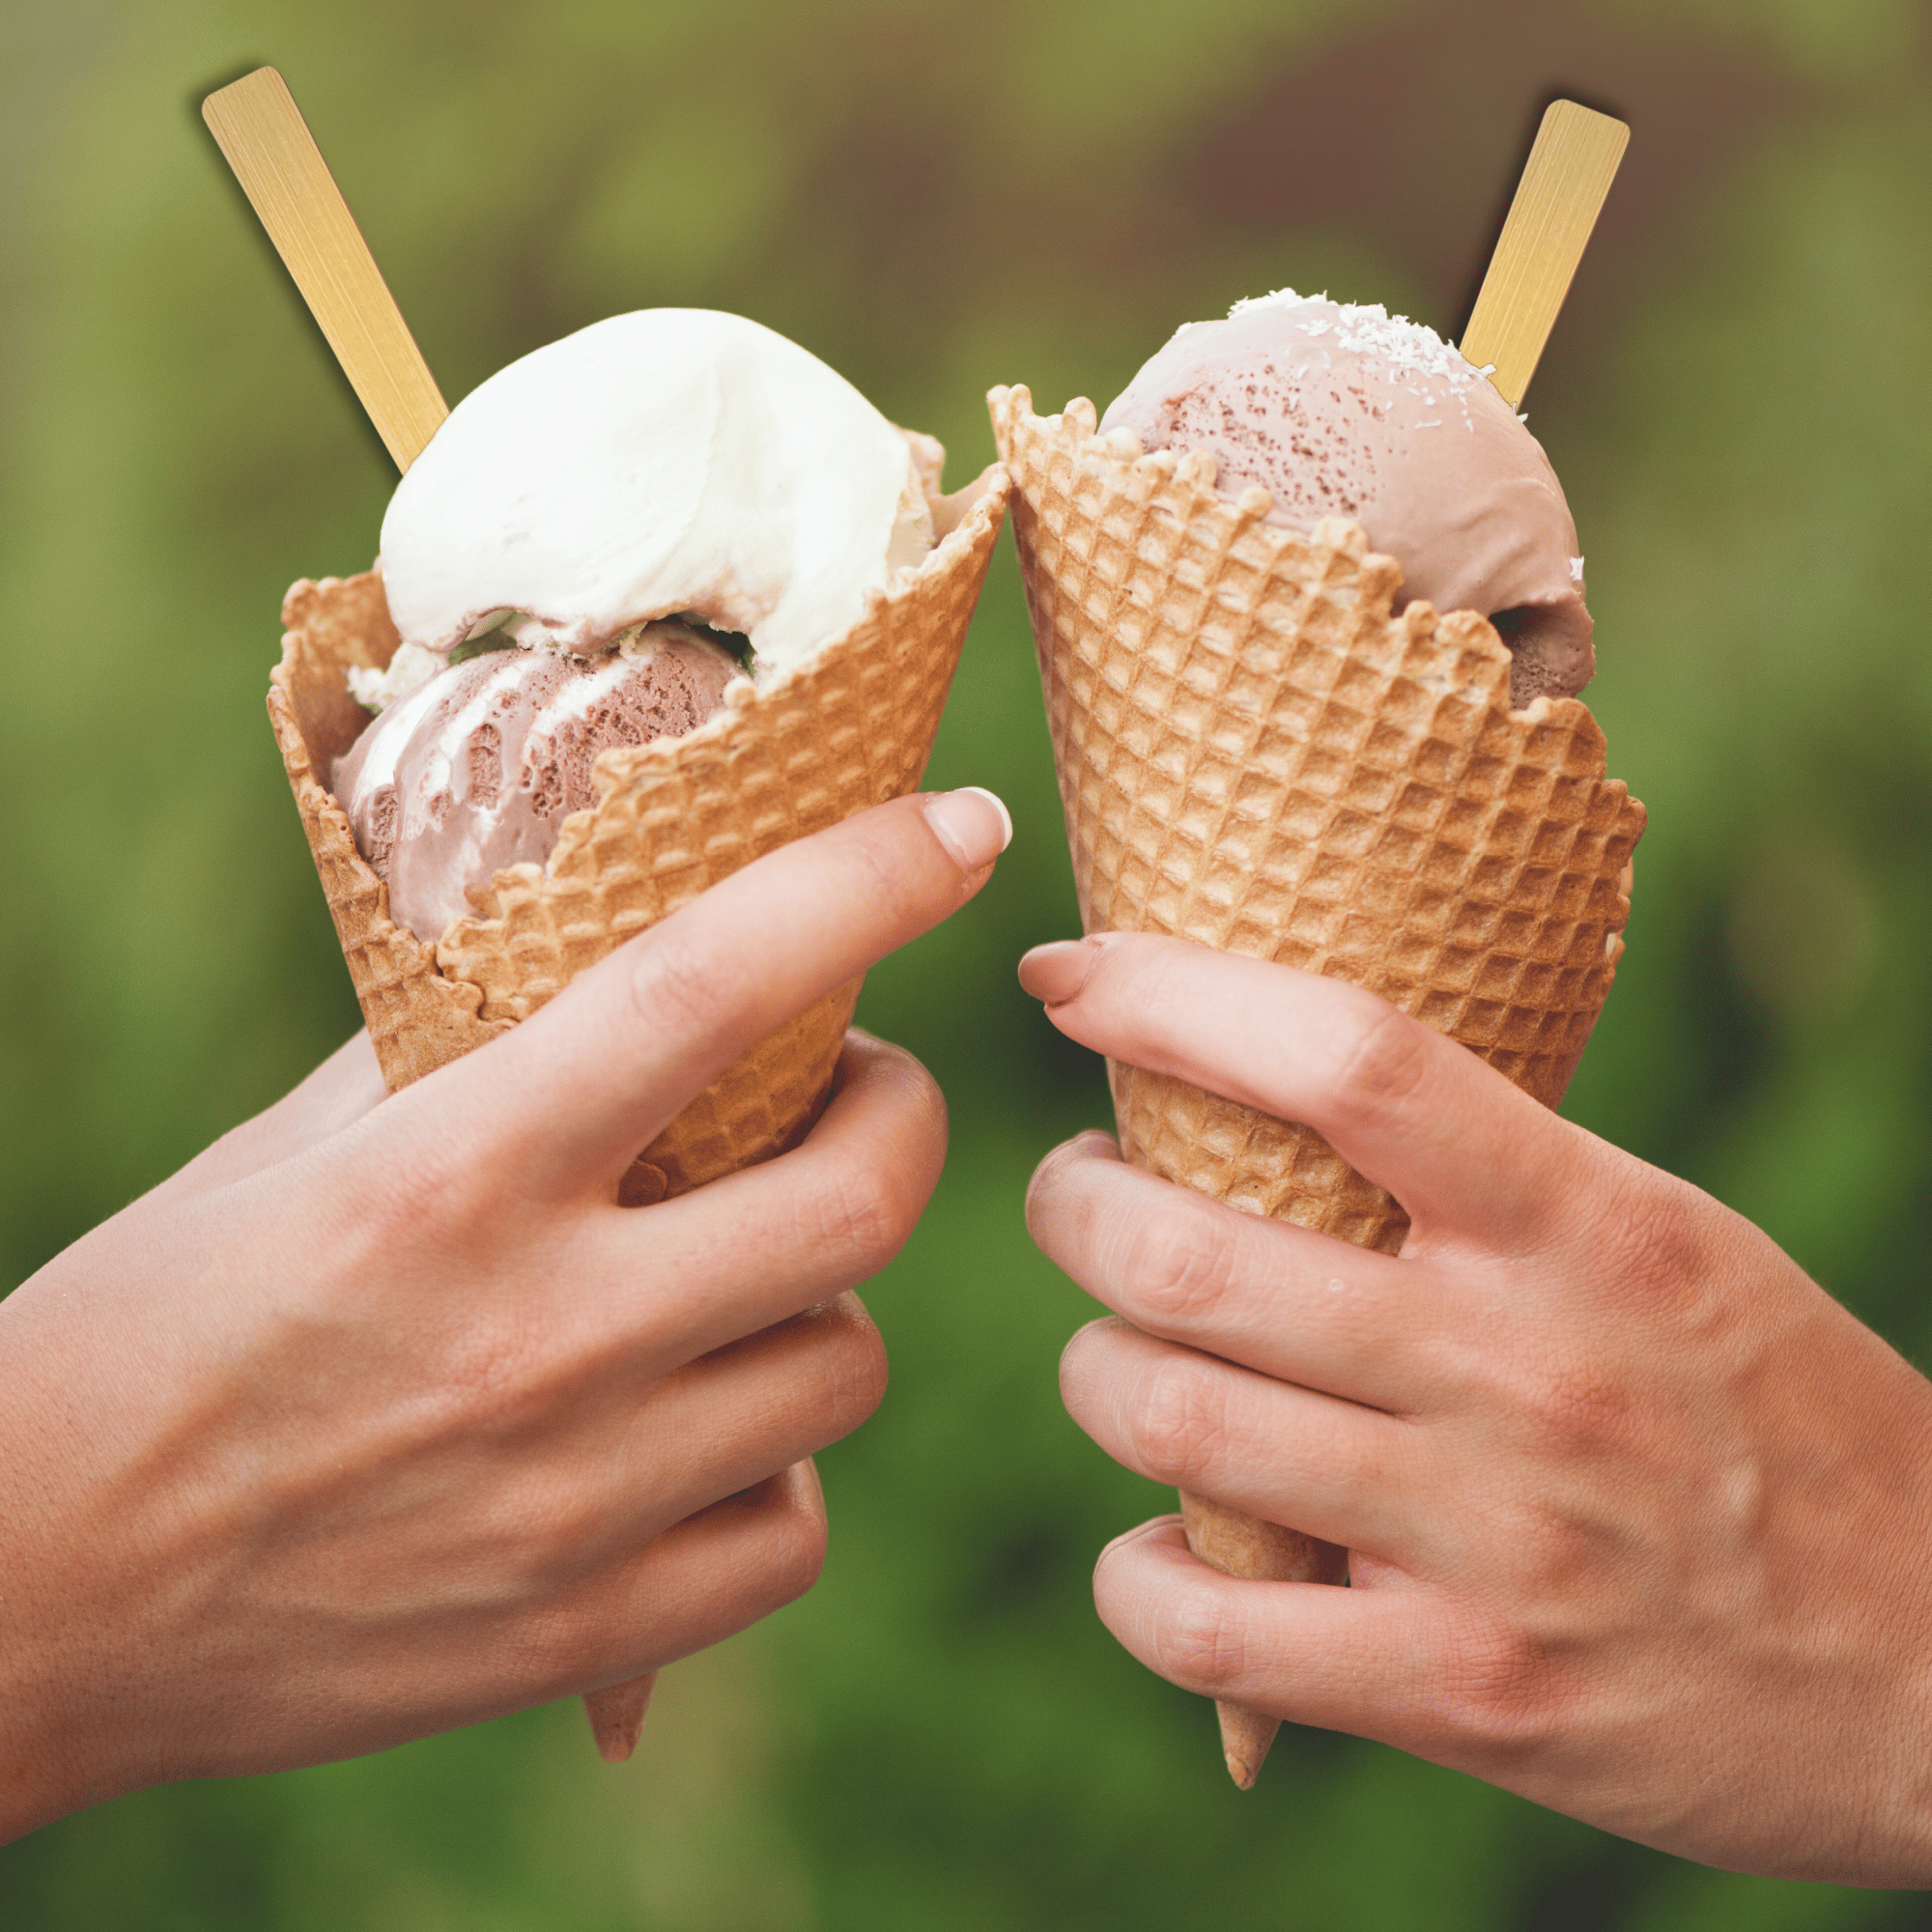 Two hands holding waffle cones with scoops of ice cream, the left cone with a single scoop of vanilla and the right cone with a scoop of chocolate and a scoop of strawberry. Both cones feature unwrapped taster bamboo spoons from Holy City Straw Co. The background is green and blurred, suggesting an outdoor setting